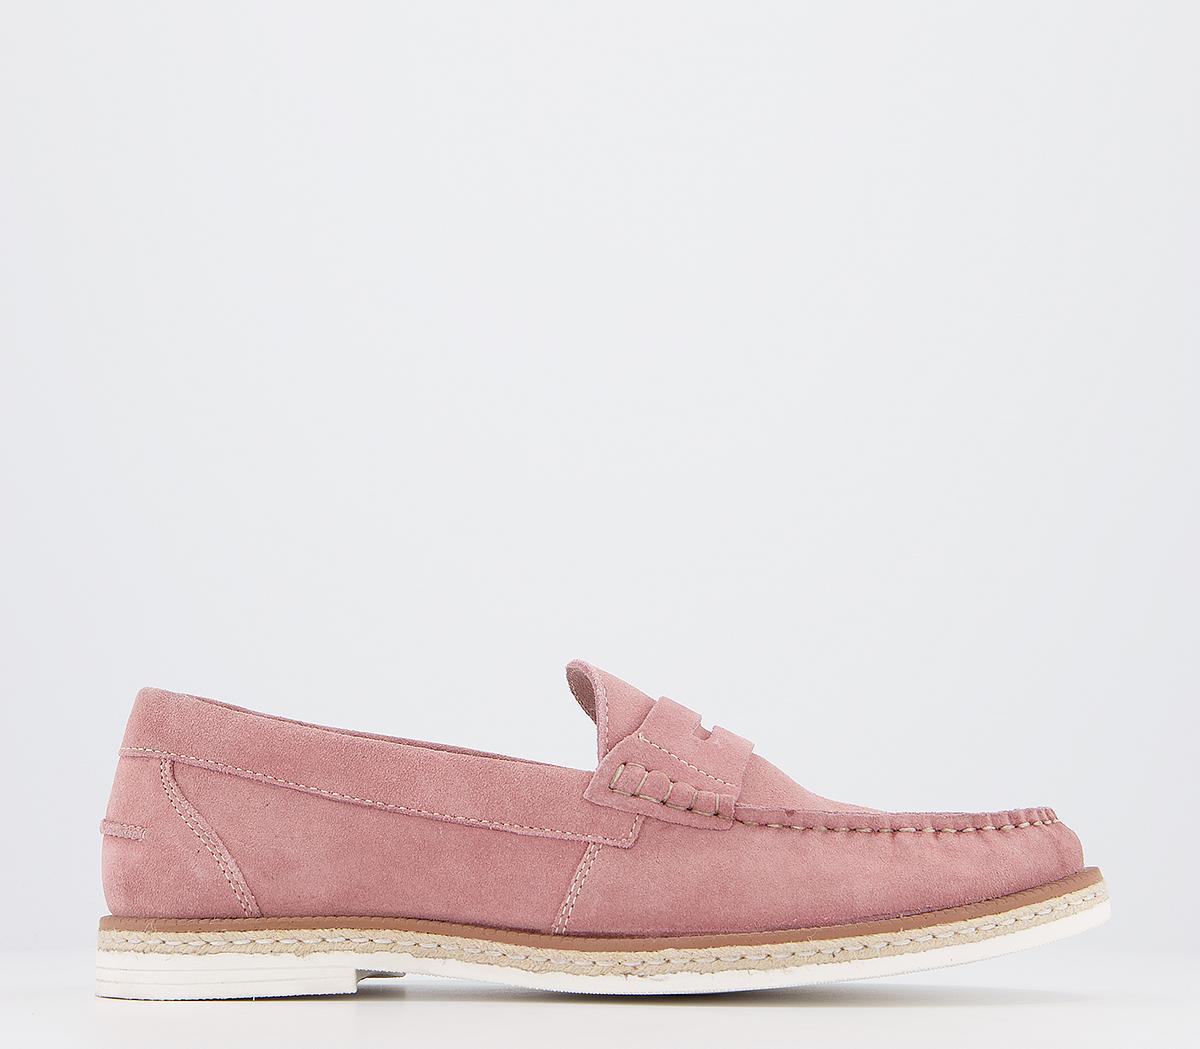 pink suede loafers